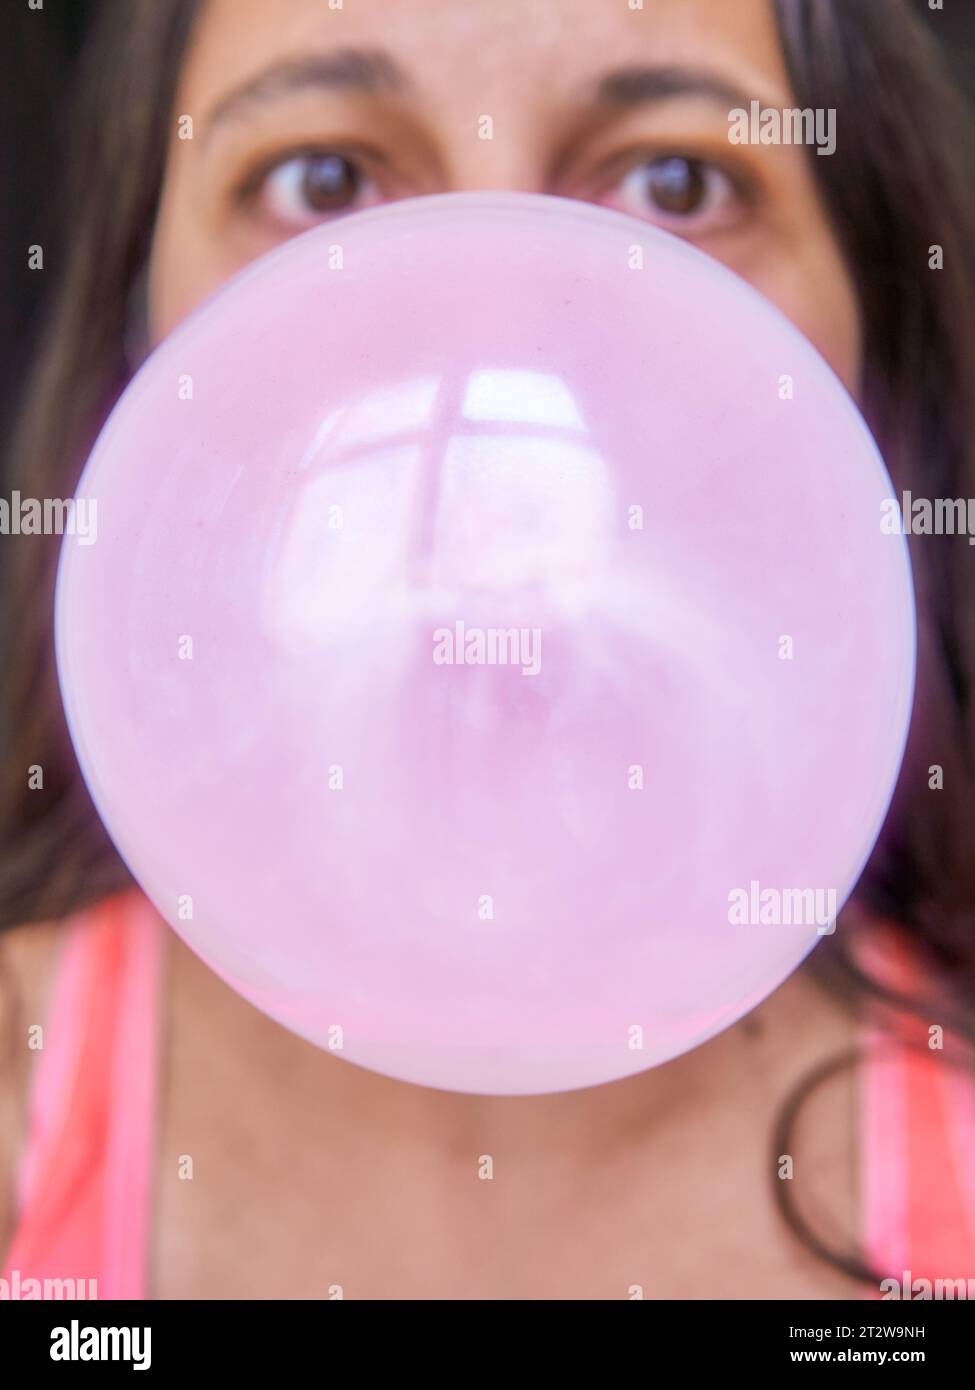 giant bubble gum balloon about to exlplode on mid adult woman face Stock Photo